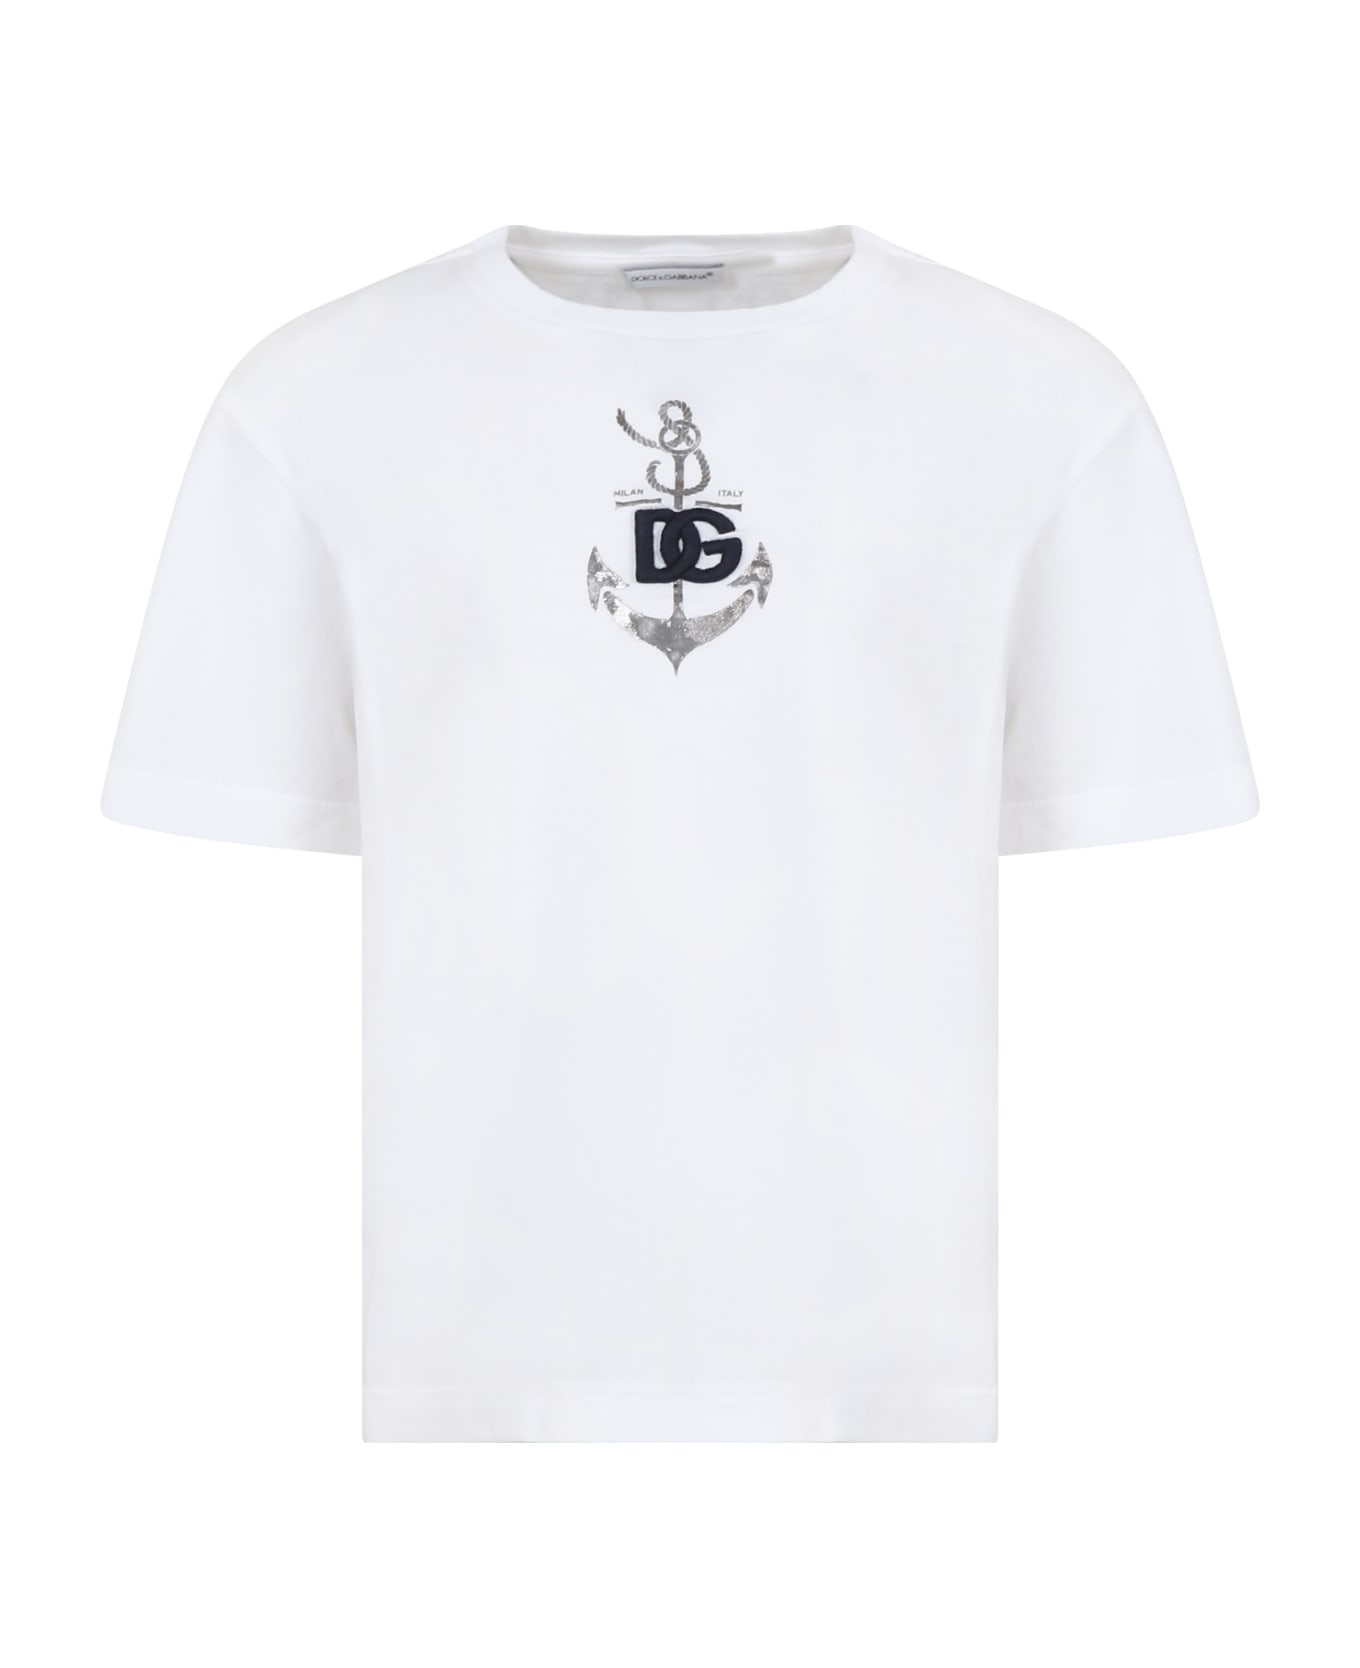 Dolce & Gabbana Whit T-shirt Shorts For Boy With Iconic Monogram Tシャツ＆ポロシャツ